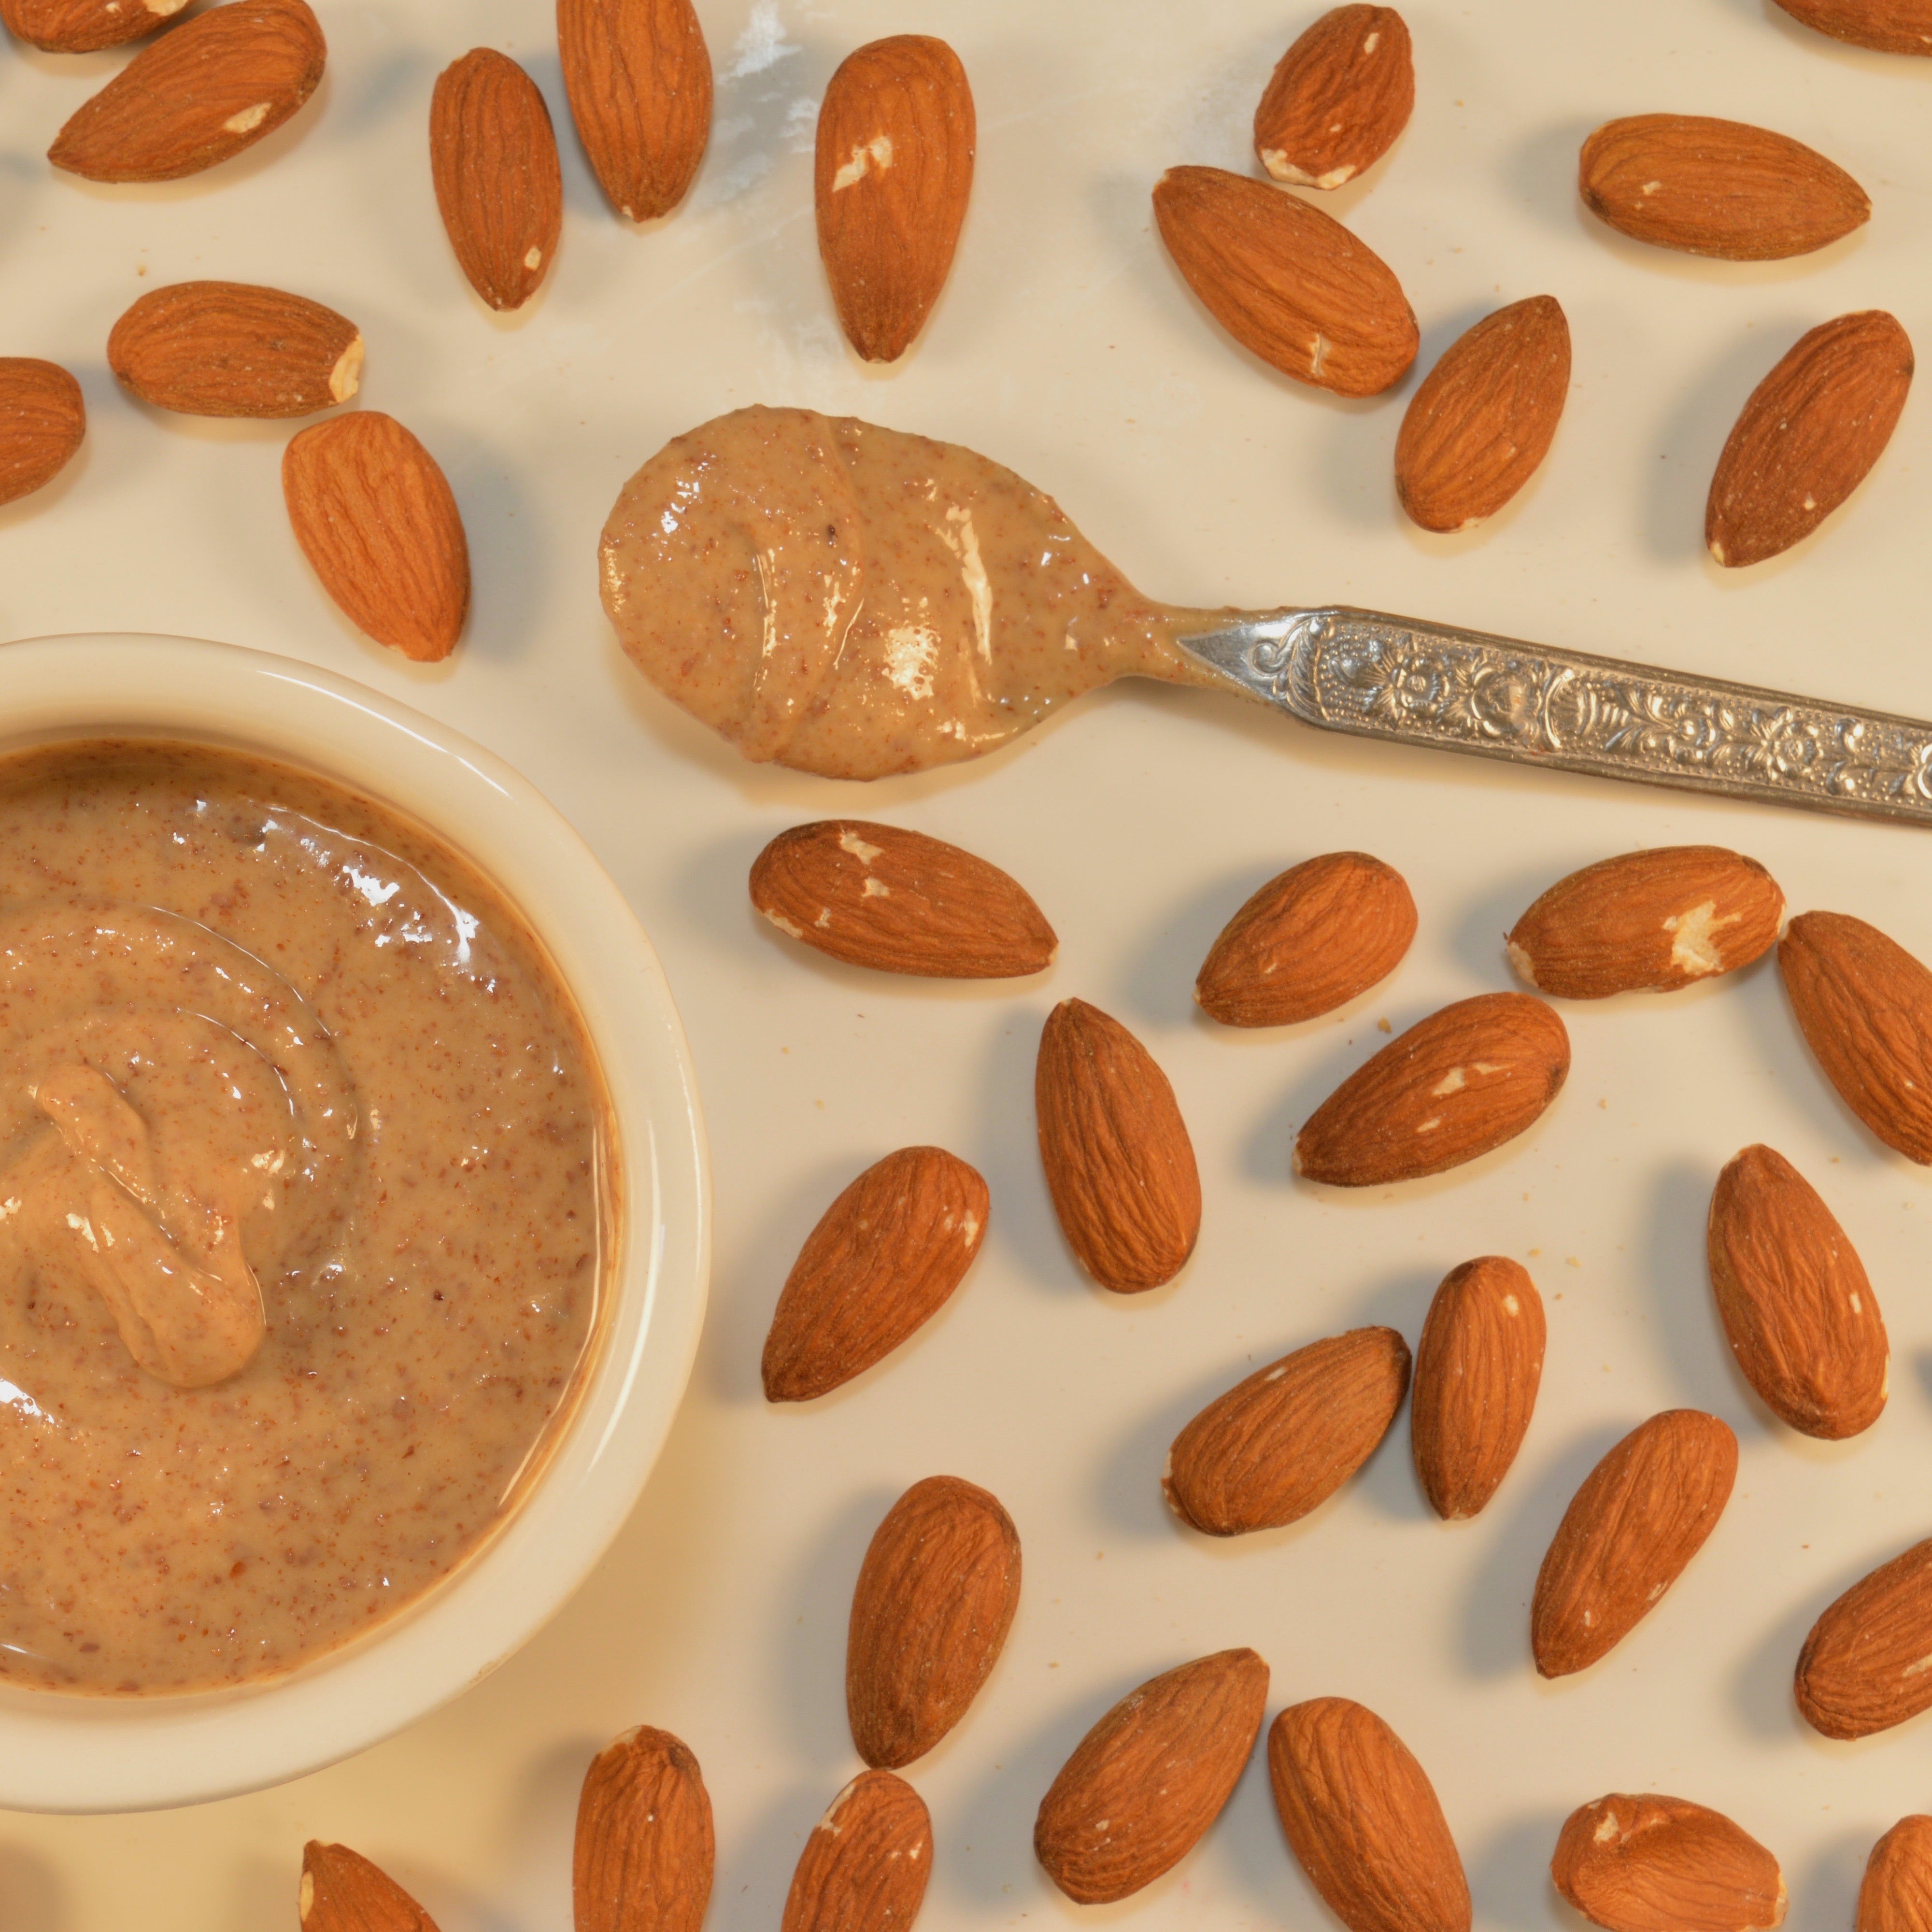 How to Make Almond Butter (in 1 Minute!) - Almond Butter Recipe